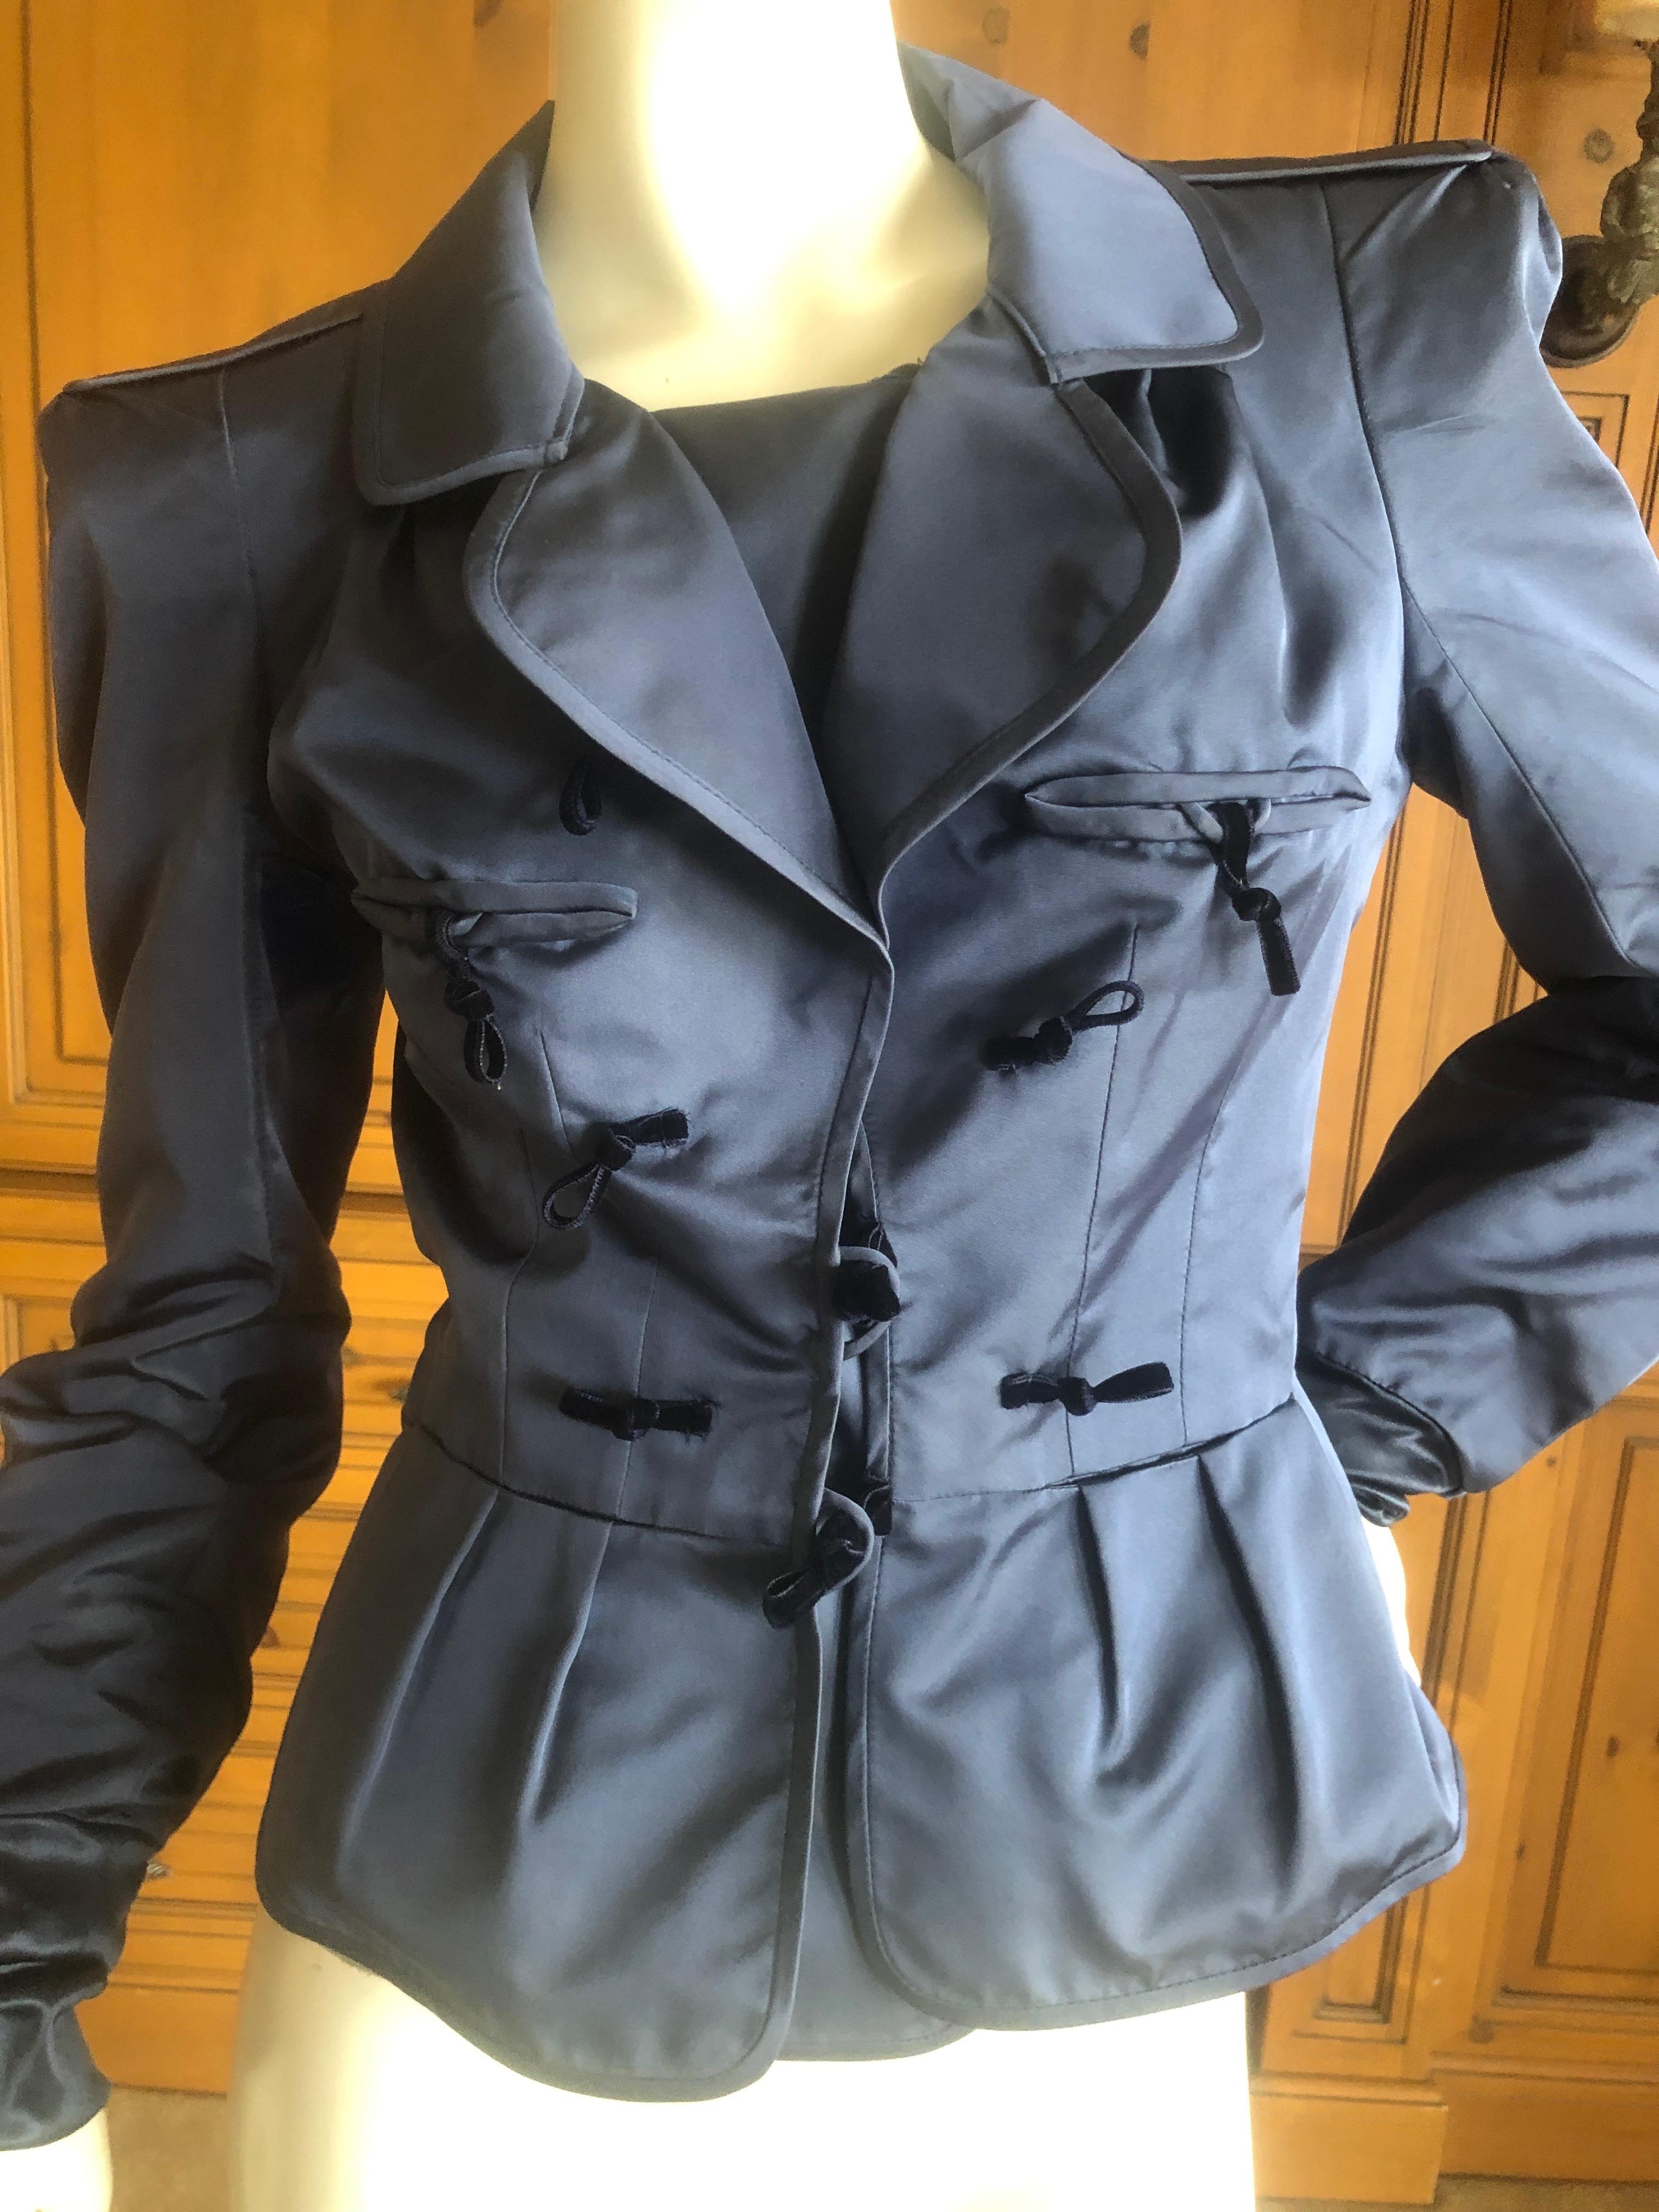 Yves Saint Laurent Tom Ford Fall 2004 Teal Blue Silk Pagoda Shoulder Jacket In Excellent Condition For Sale In Cloverdale, CA